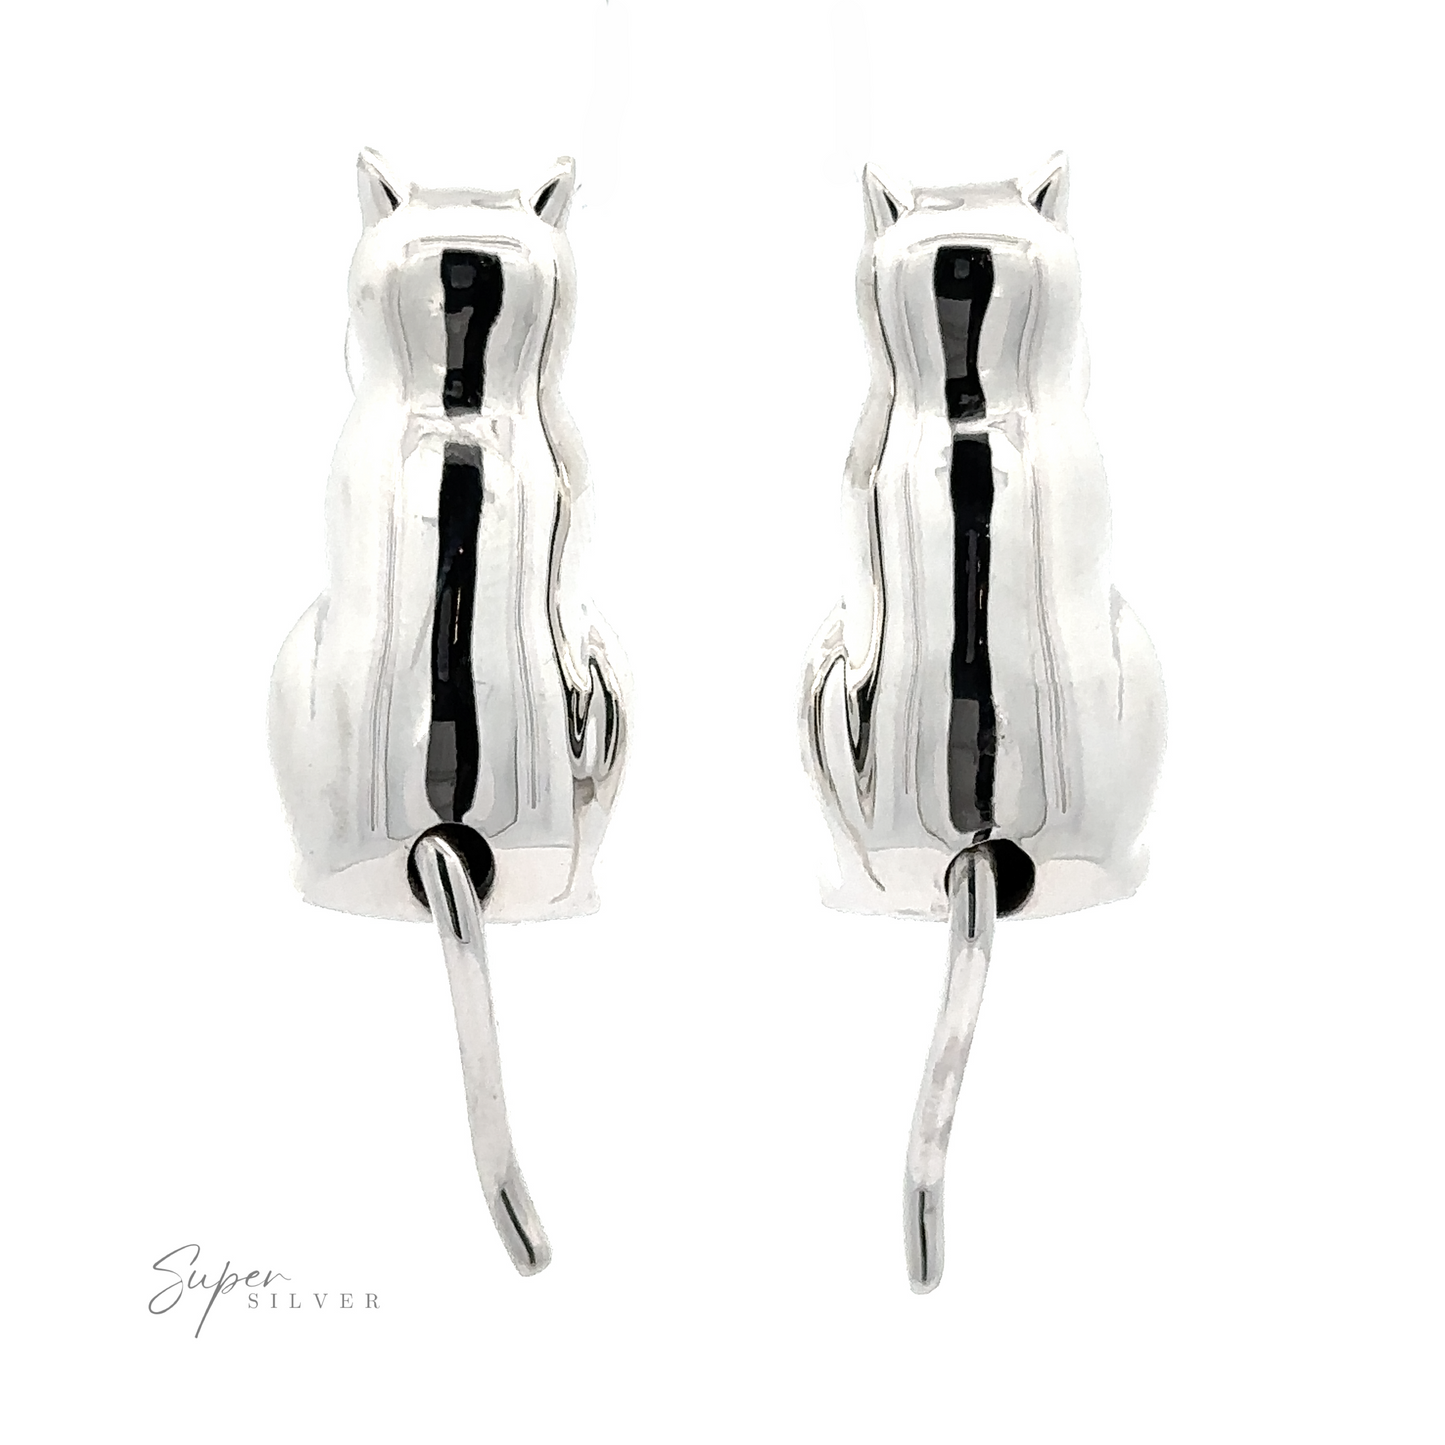 Pair of Silver Cat Earrings with a polished finish, viewed from the back, displayed on a white background.